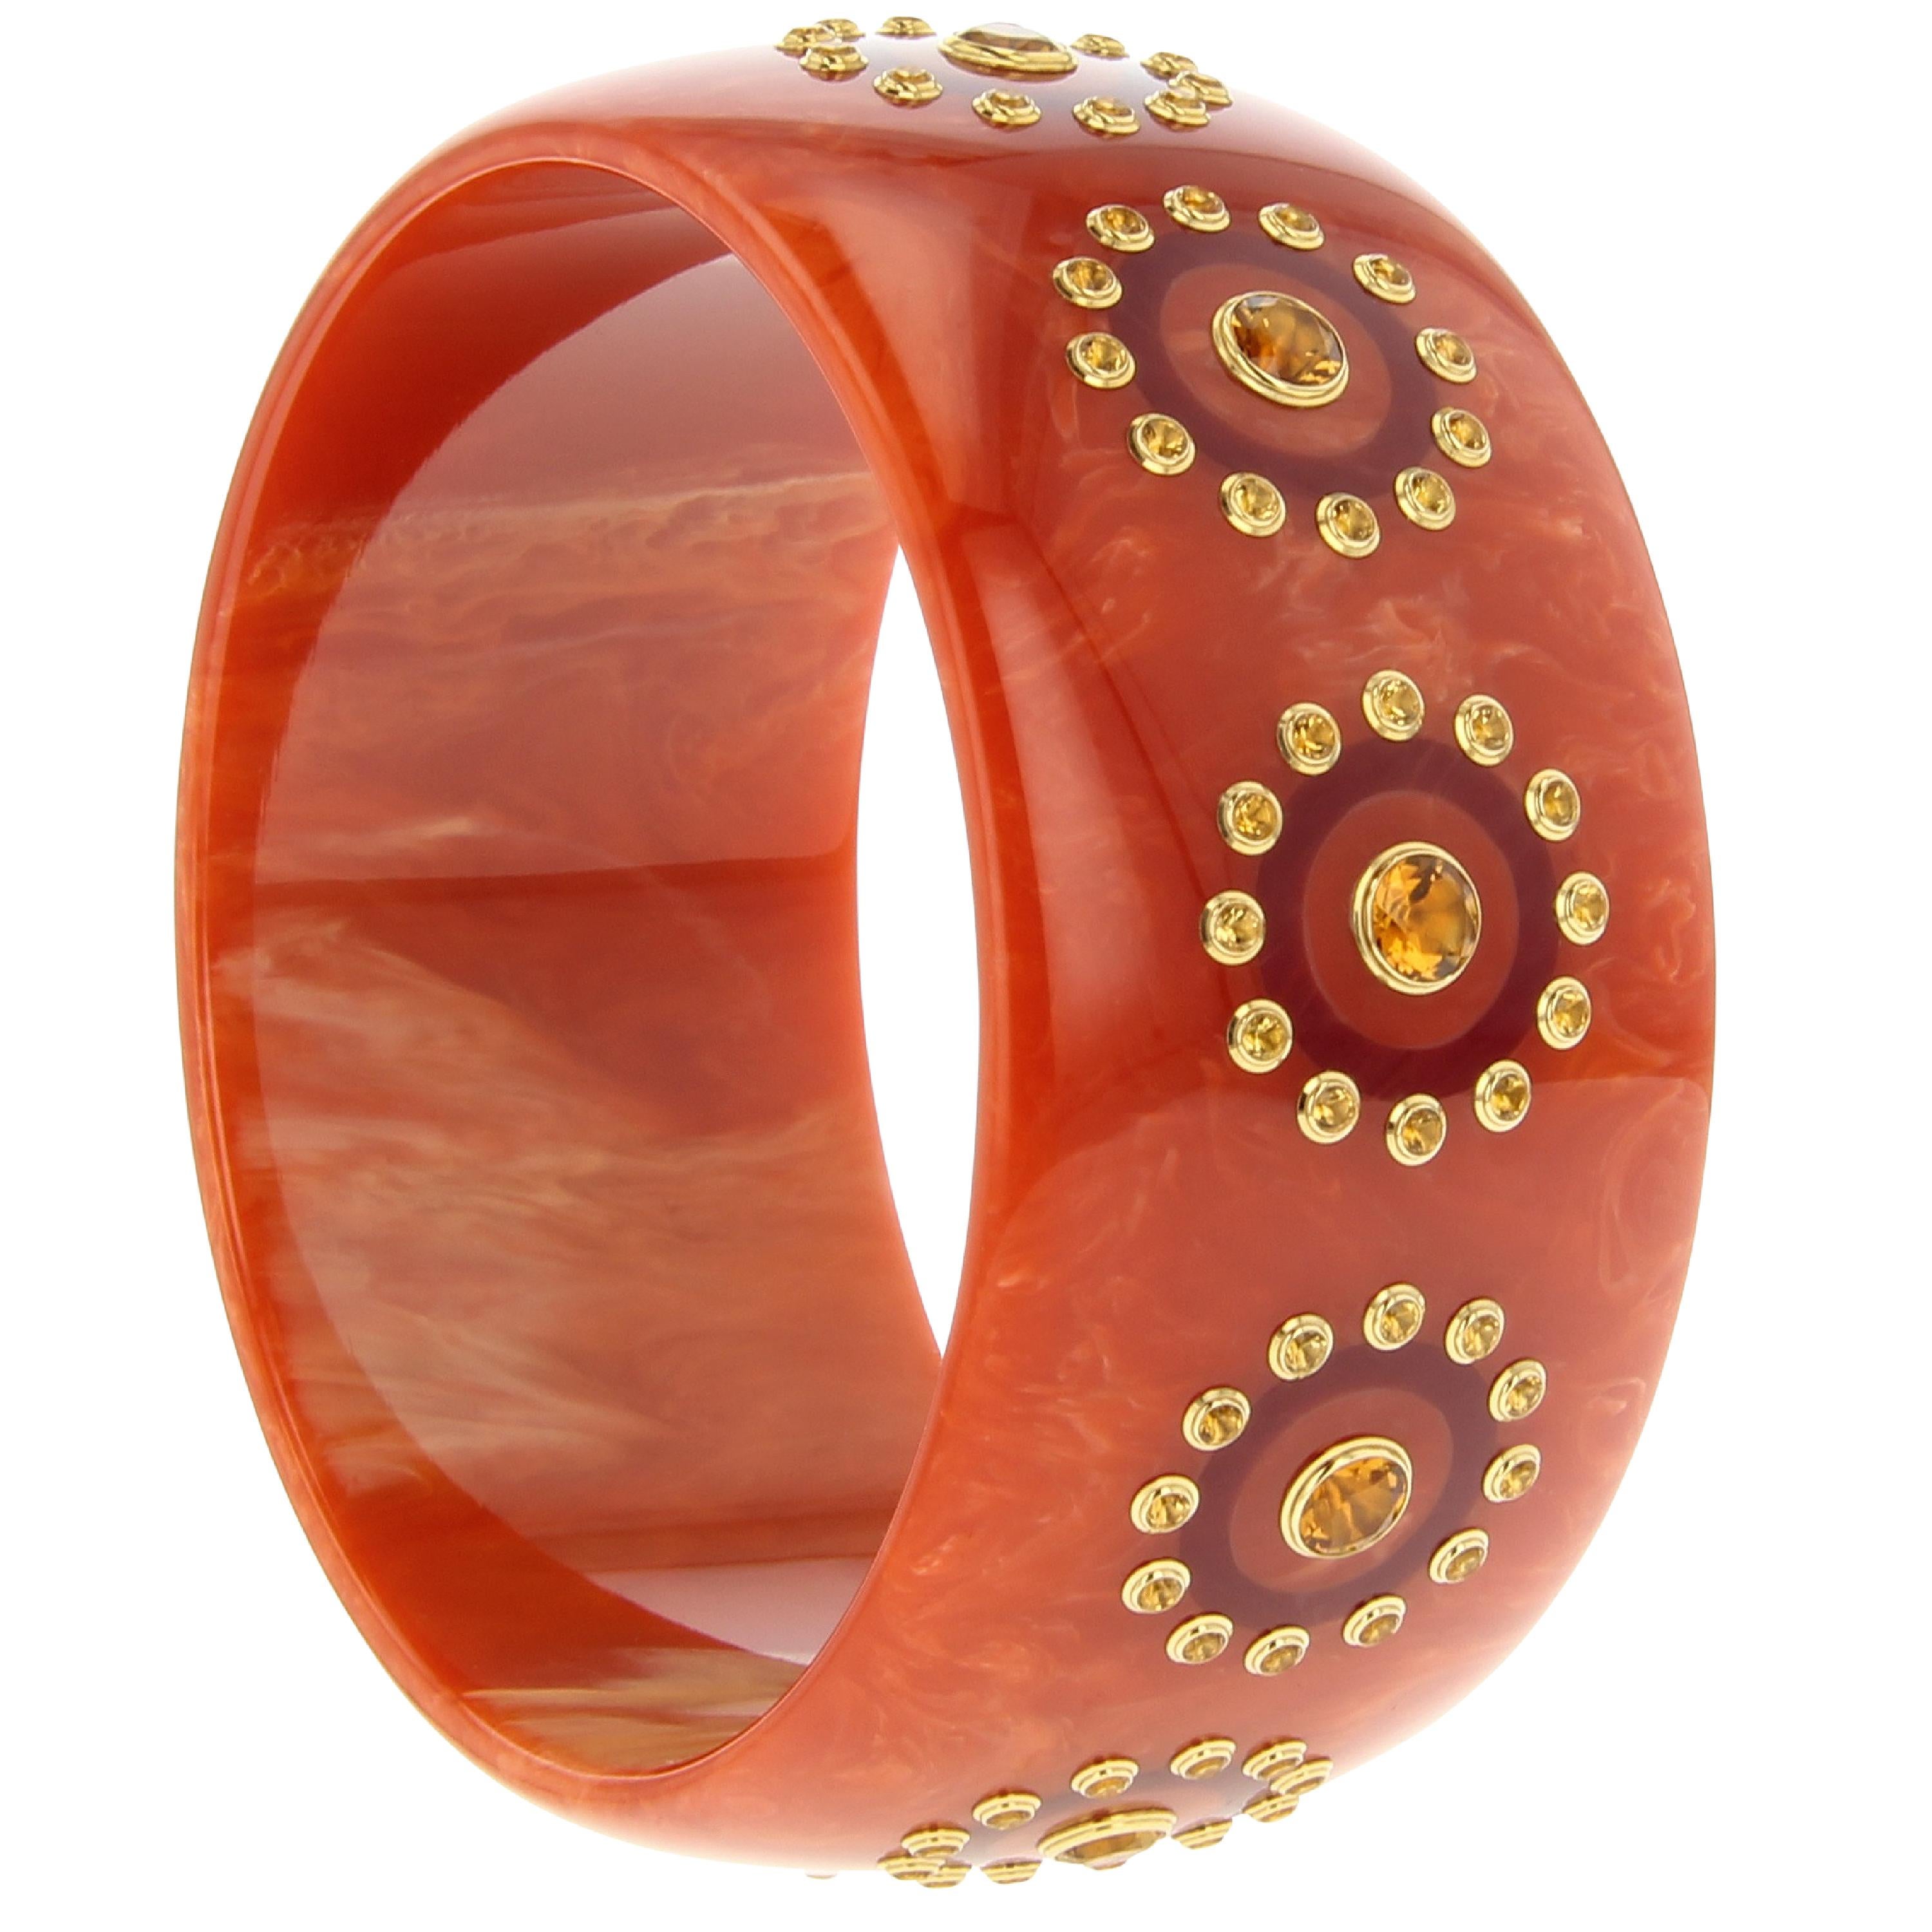 This stunning Mark Davis bangle was created from vintage bakelite with subtle burgundy rings inlaid within a border of perfectly matched citrine. The center of each ring features a larger single citrine mounted in an 18k yellow gold bezel.

Full